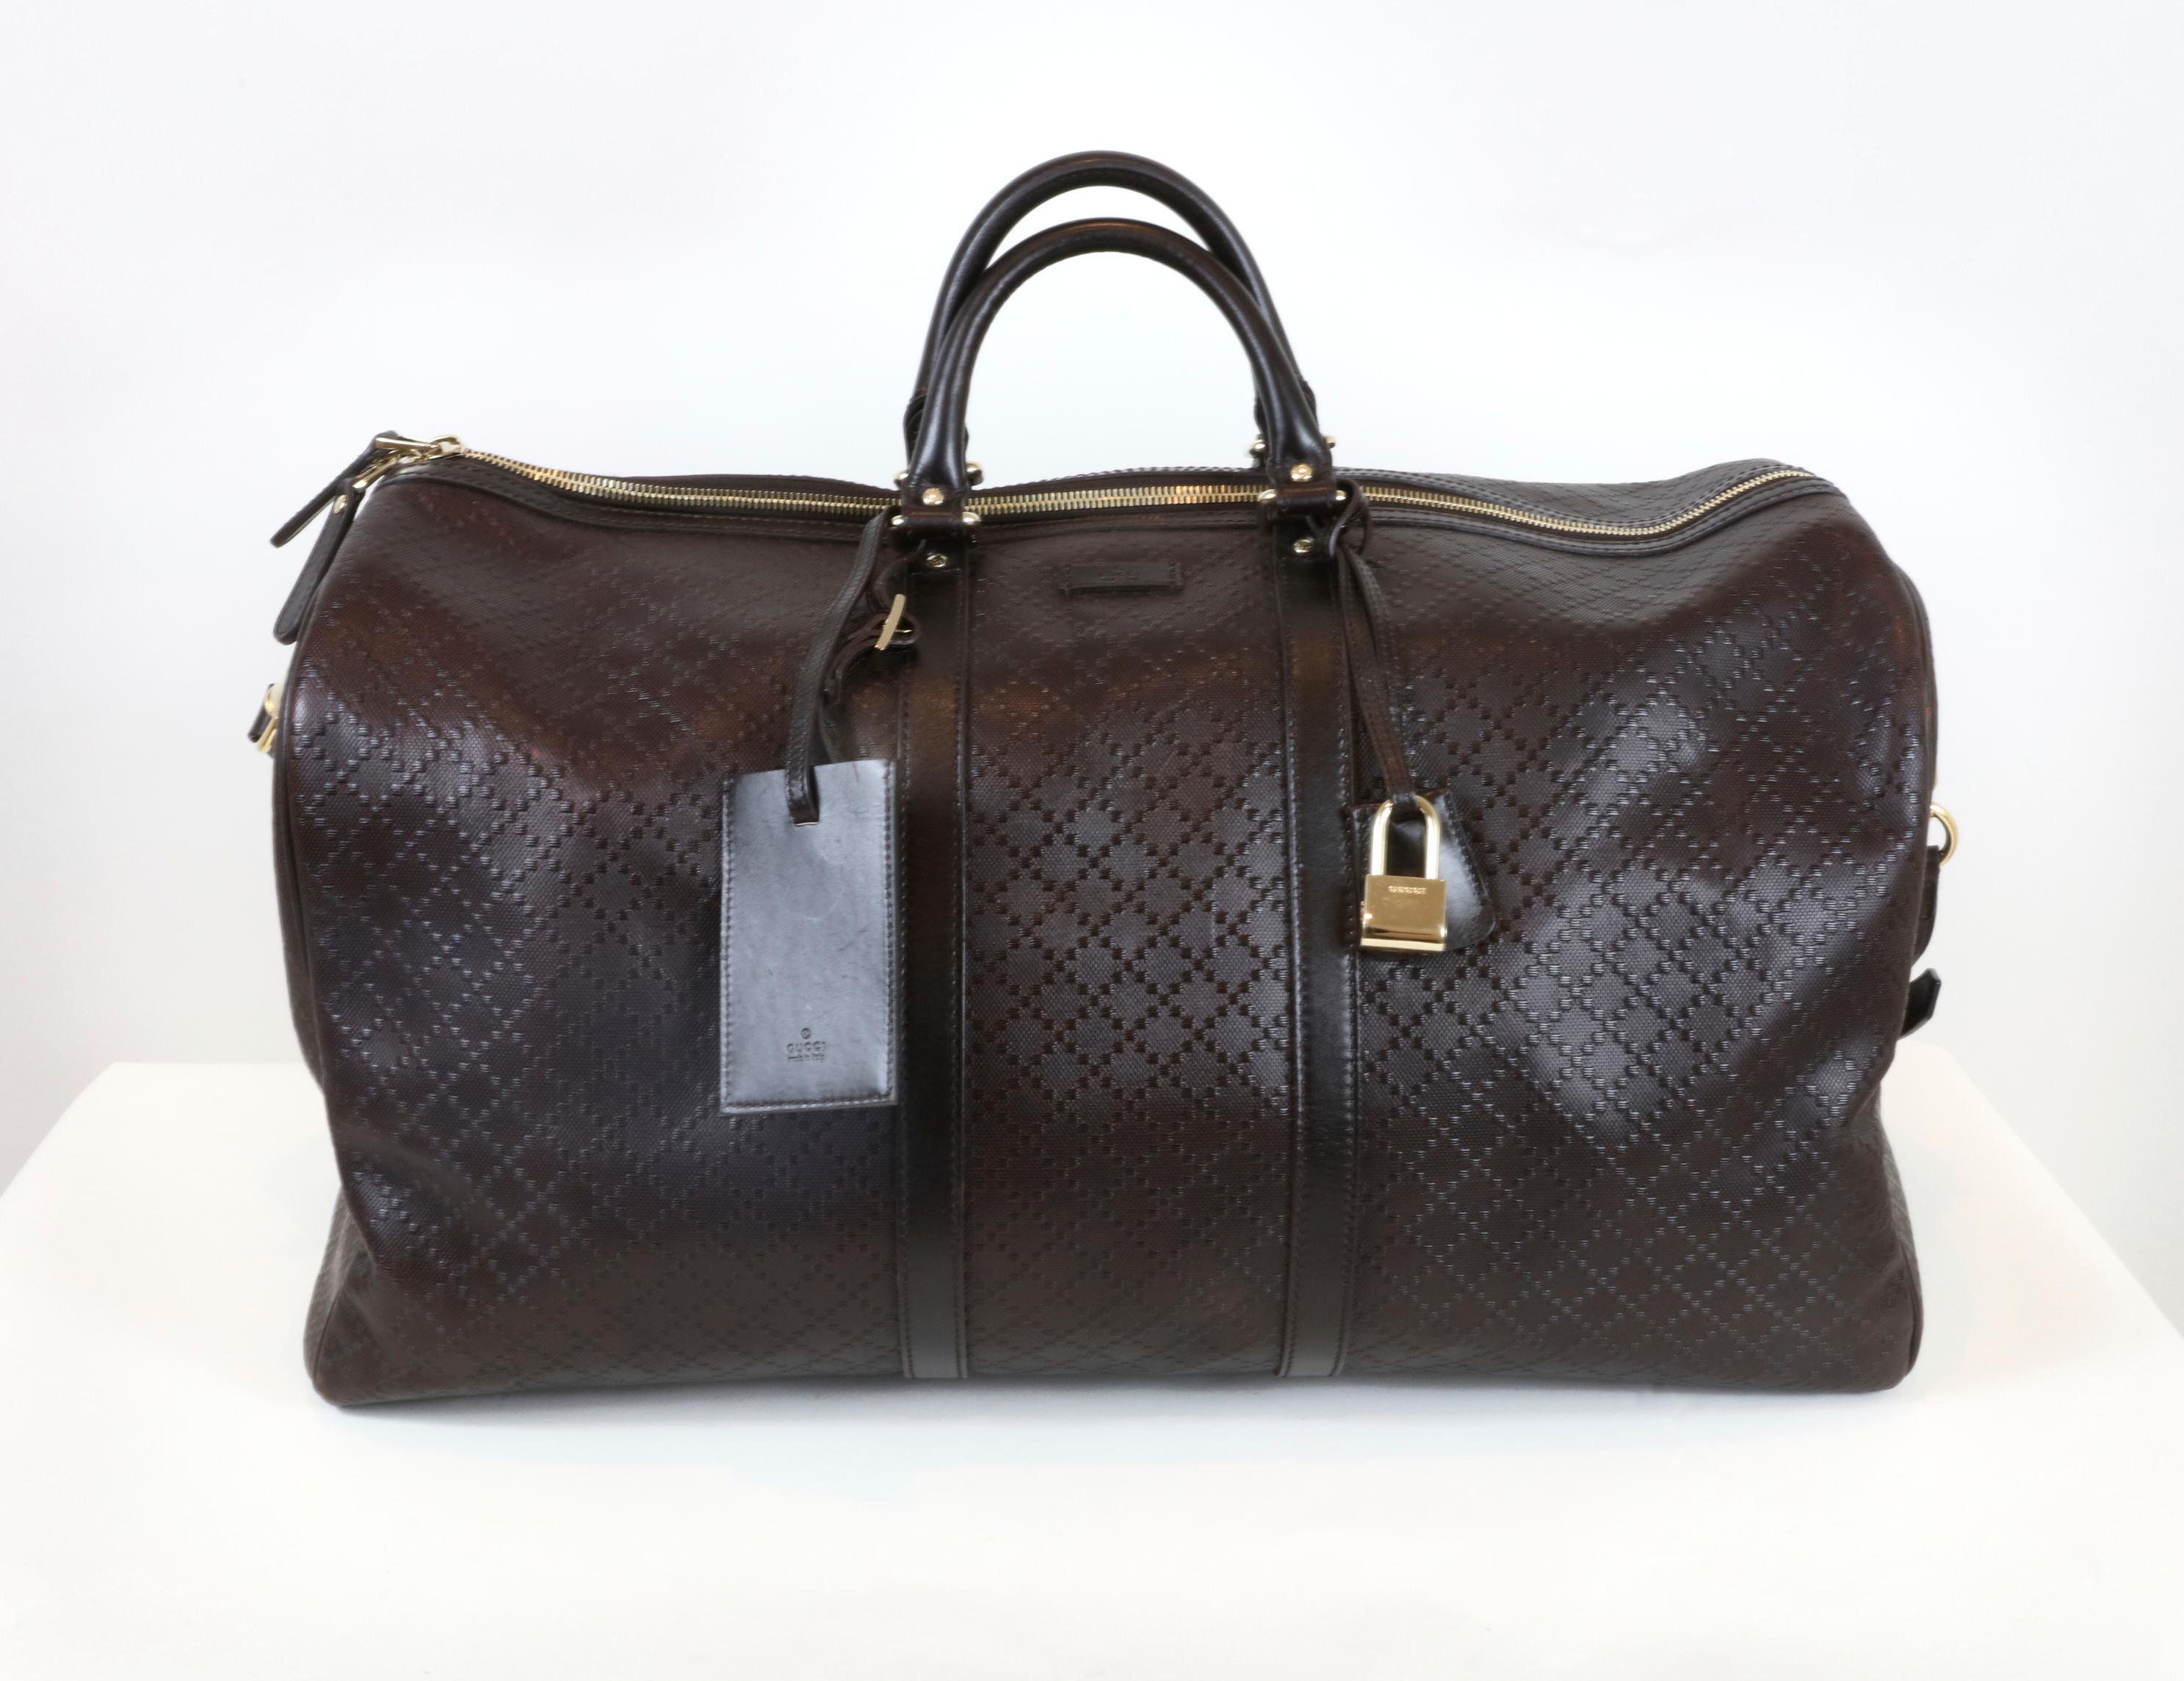 Black Gucci Leather Brown Overnight Bag with Handles & Gold Hardware